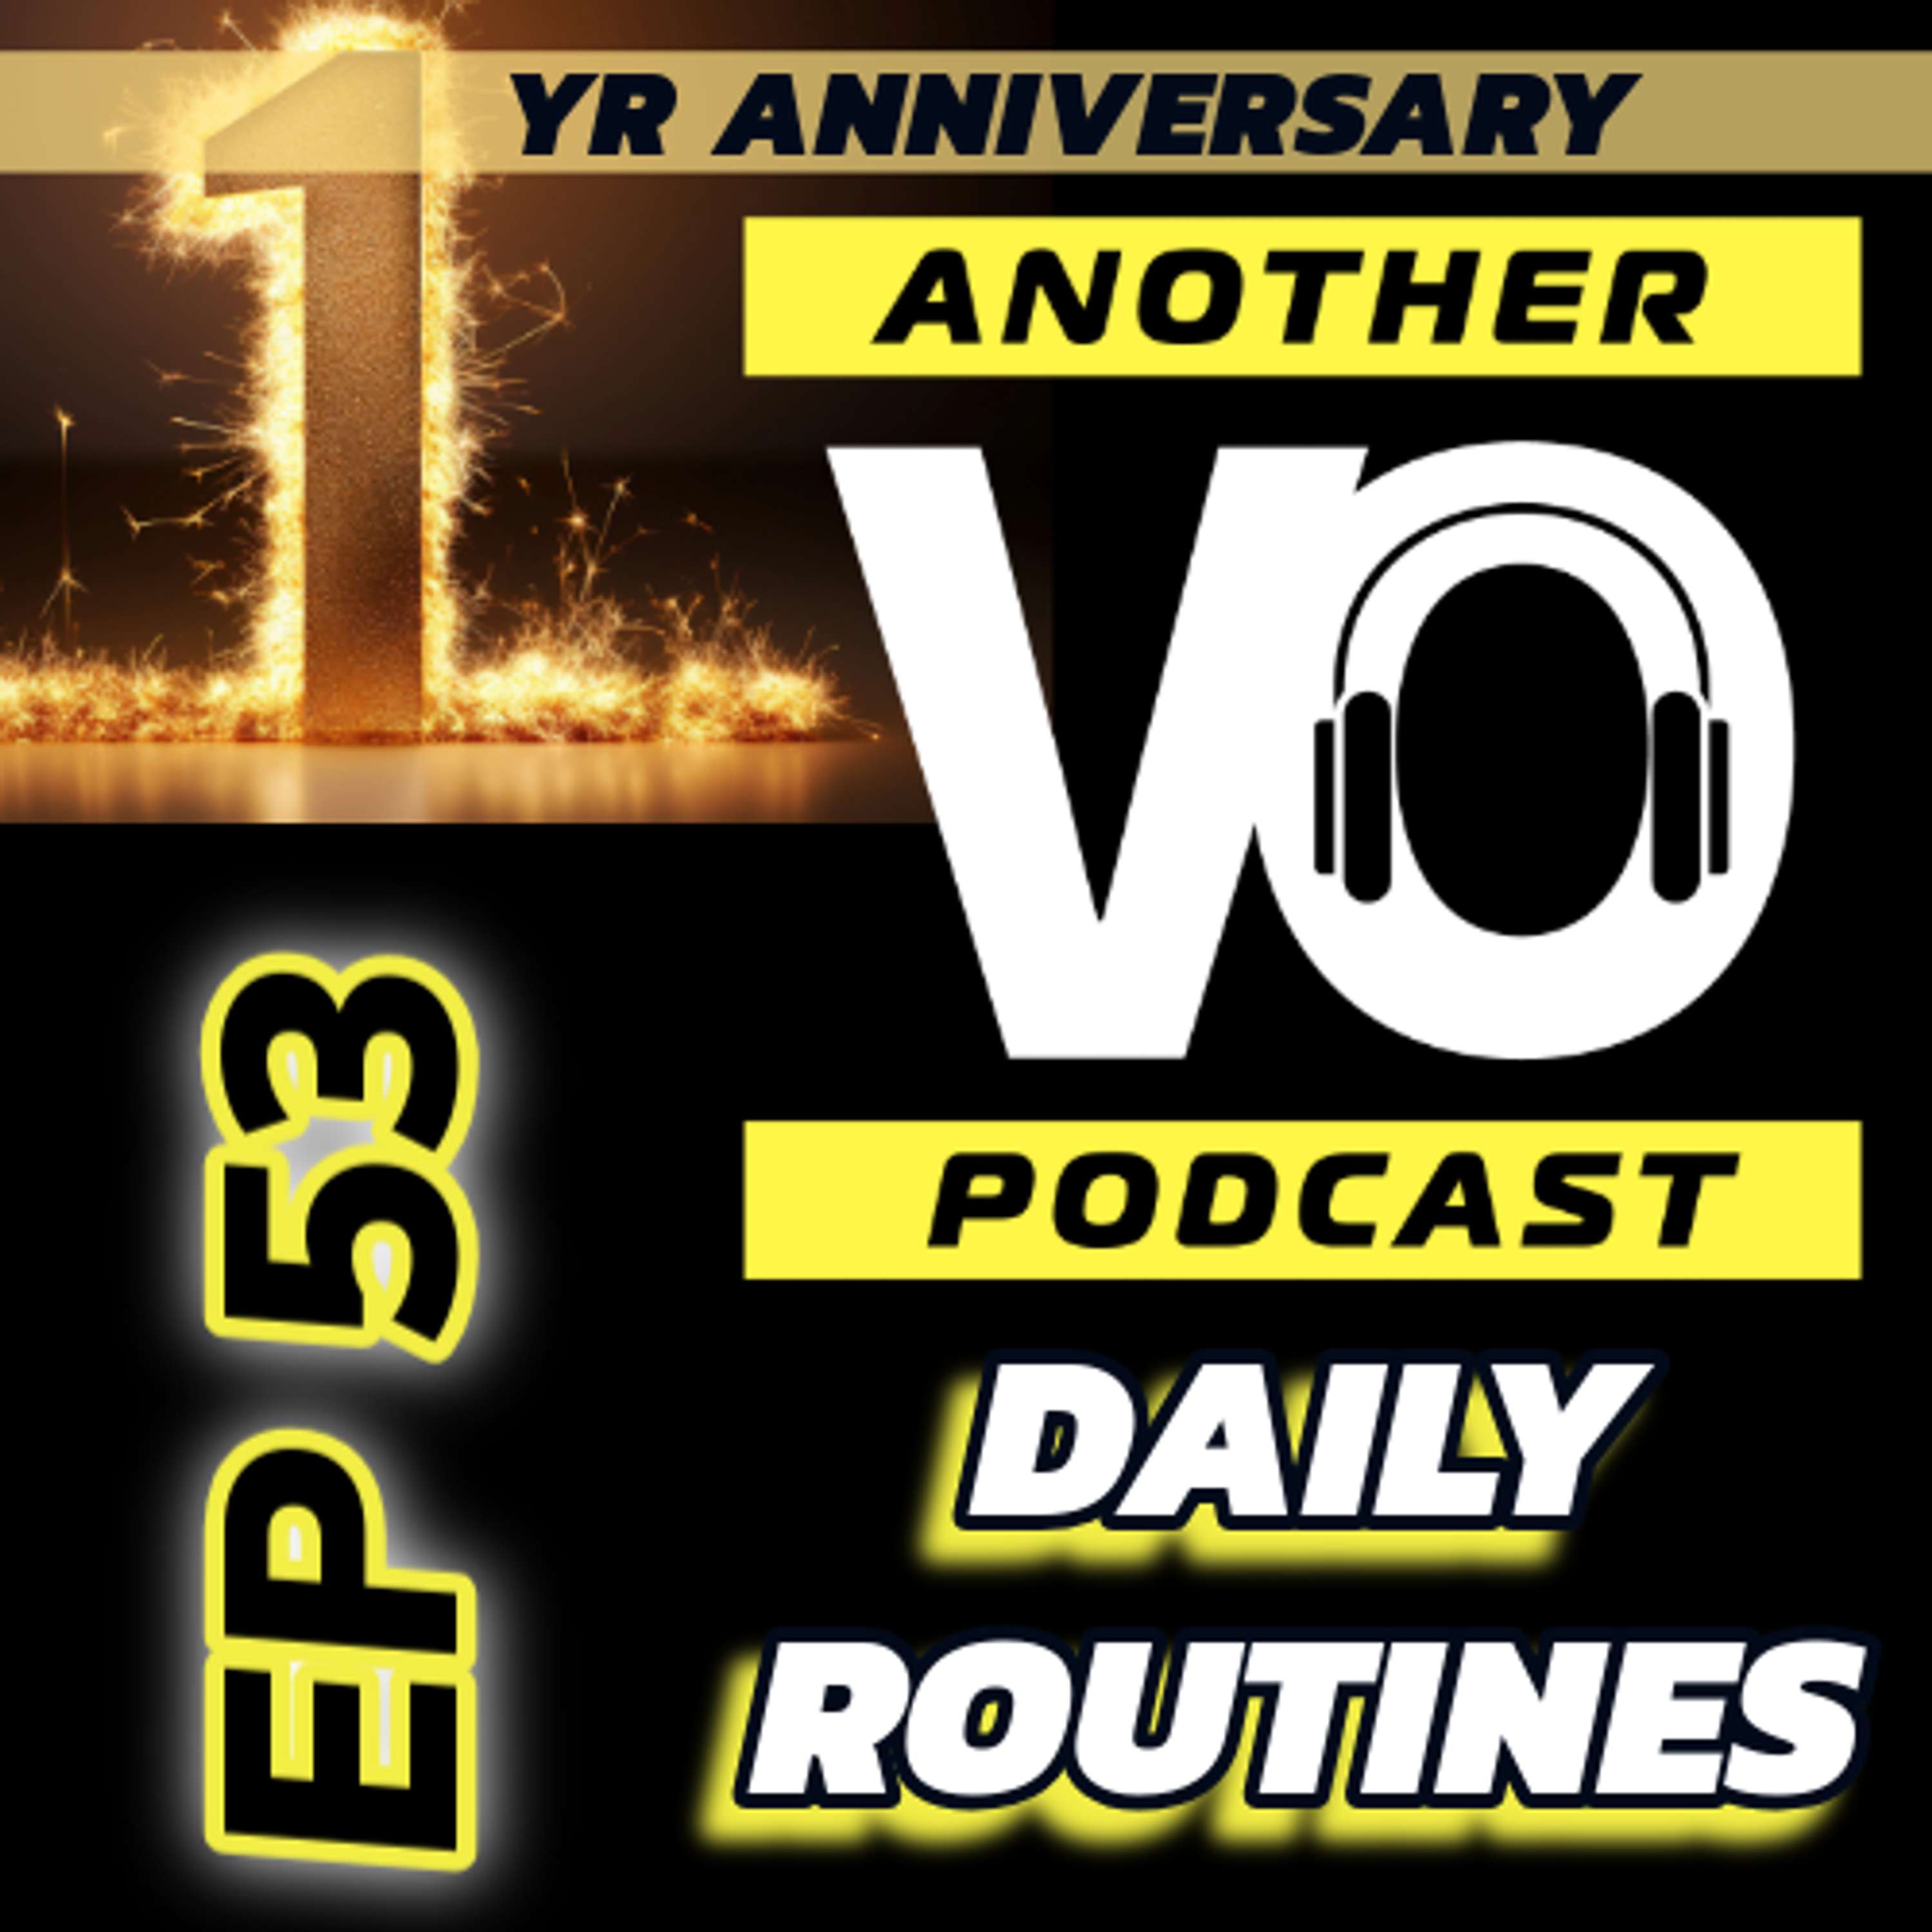 EP 53- One Year/Routines